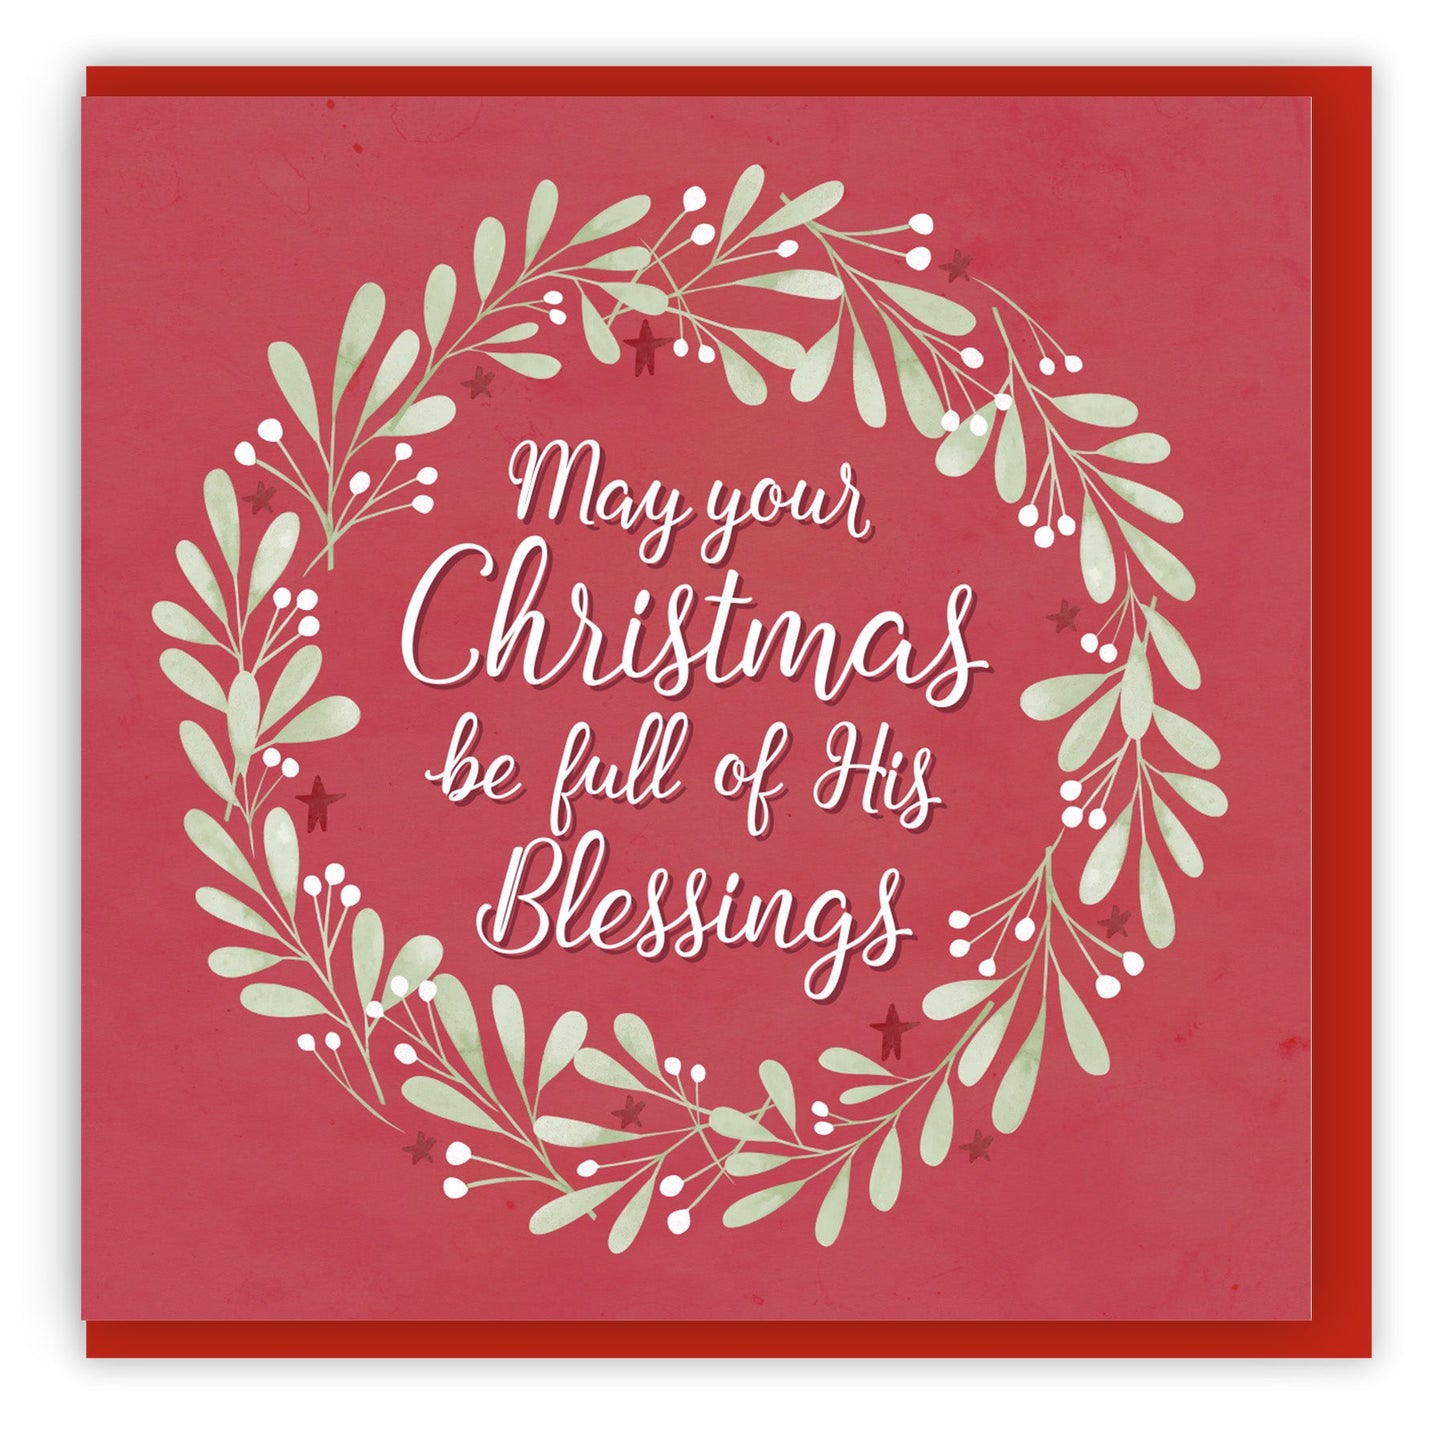 Full of Blessings (2023) Christmas Cards - 10 Pack - Bio Cello Packaging